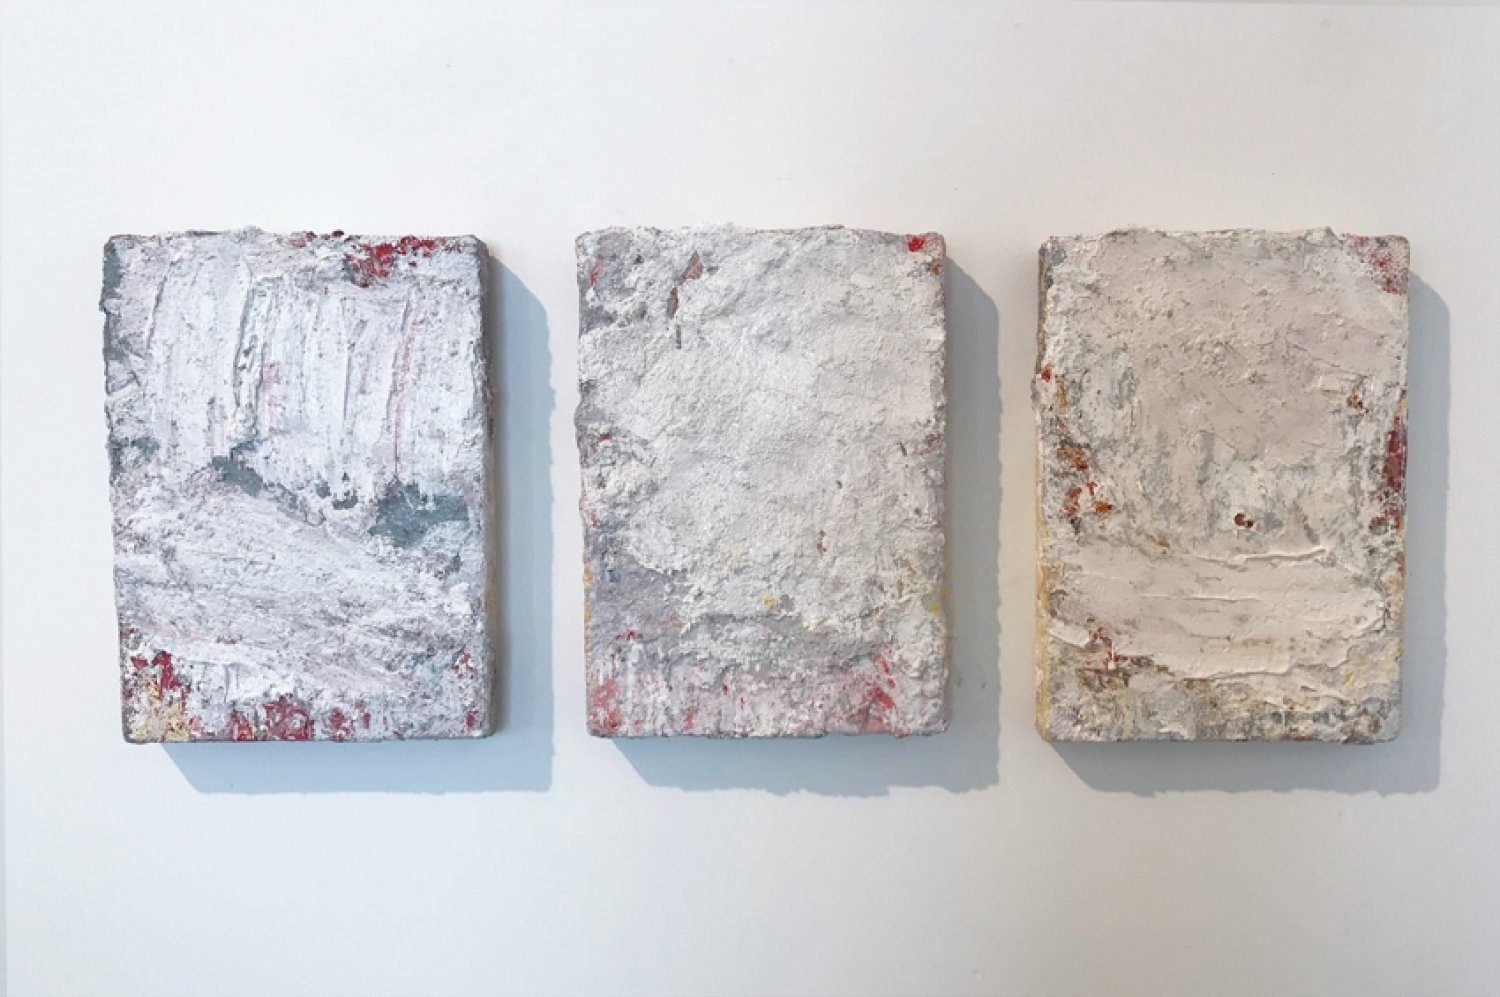 Aida Tomescu, Left: In a carpet made of water I, 2017 oil, silver pigment on Belgian linen, 36 x26 cm. Middle: In a carpet made of water II, 2017 oil, silver pigment on Belgian linen, 36 x26 cm. Right: In a carpet made of water III, 2017 oil, silver pigment on Belgian linen, 36 x 26 cm